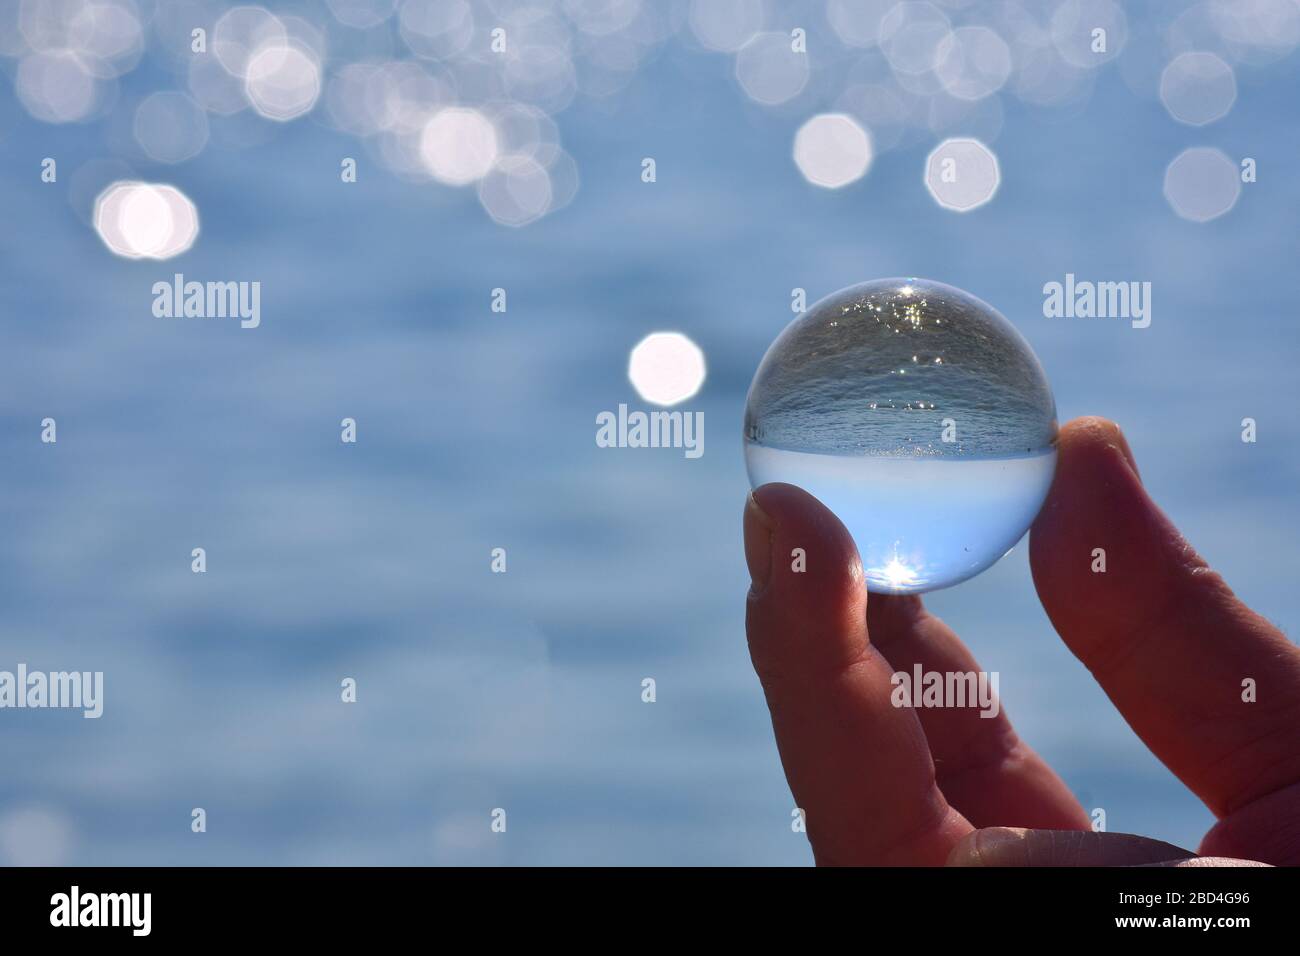 Beautiful summer coast seen through a blue glass ball/ Blue freedom concept/ Ocean Surface Ripples and Clouds in Sky Captured in Glass Ball/ Stock Photo